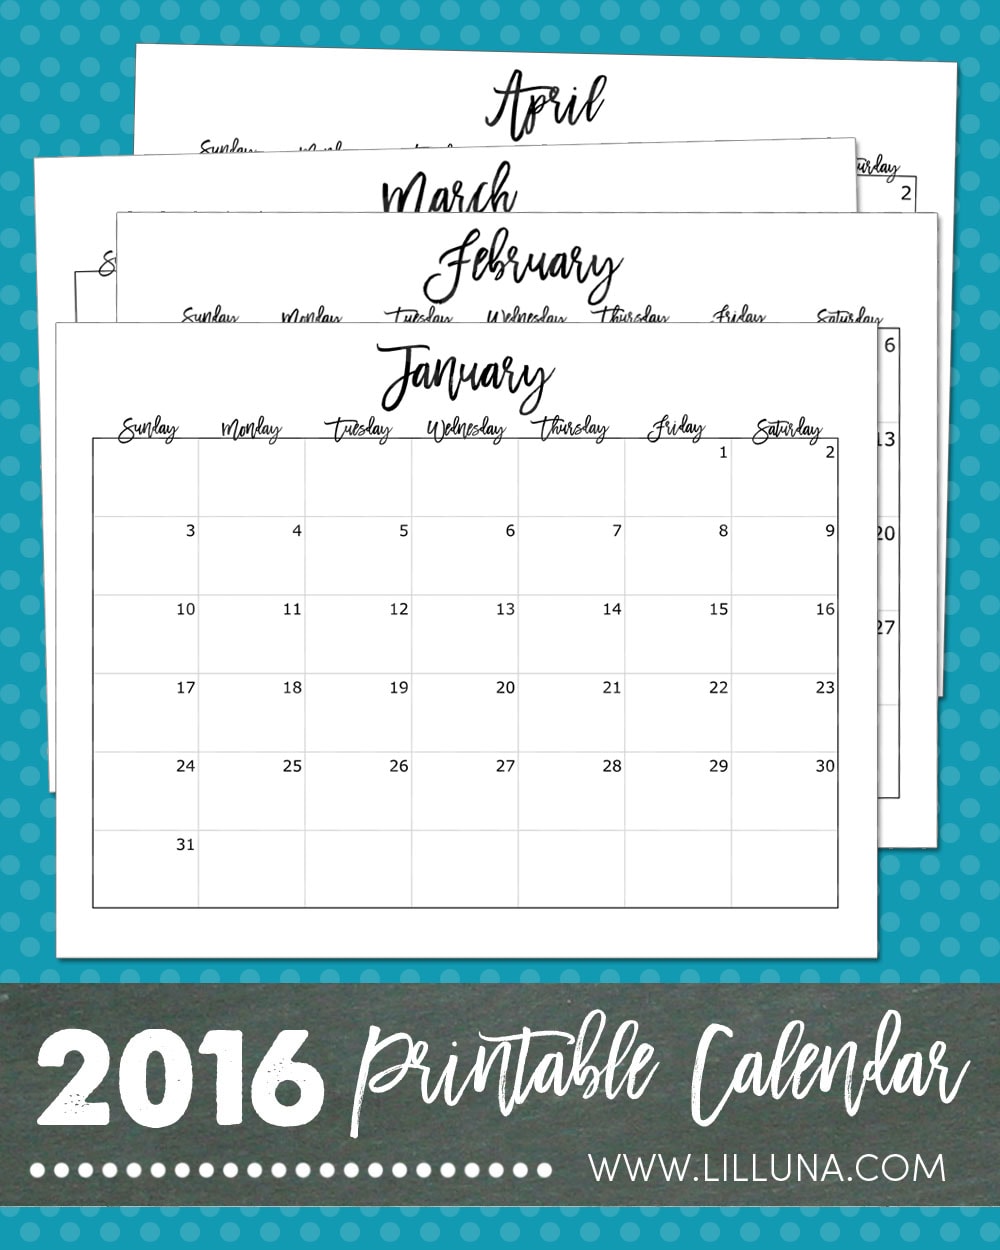 FREE 2016 Printable Calendar - use these cute prints to help you stay organized this year!